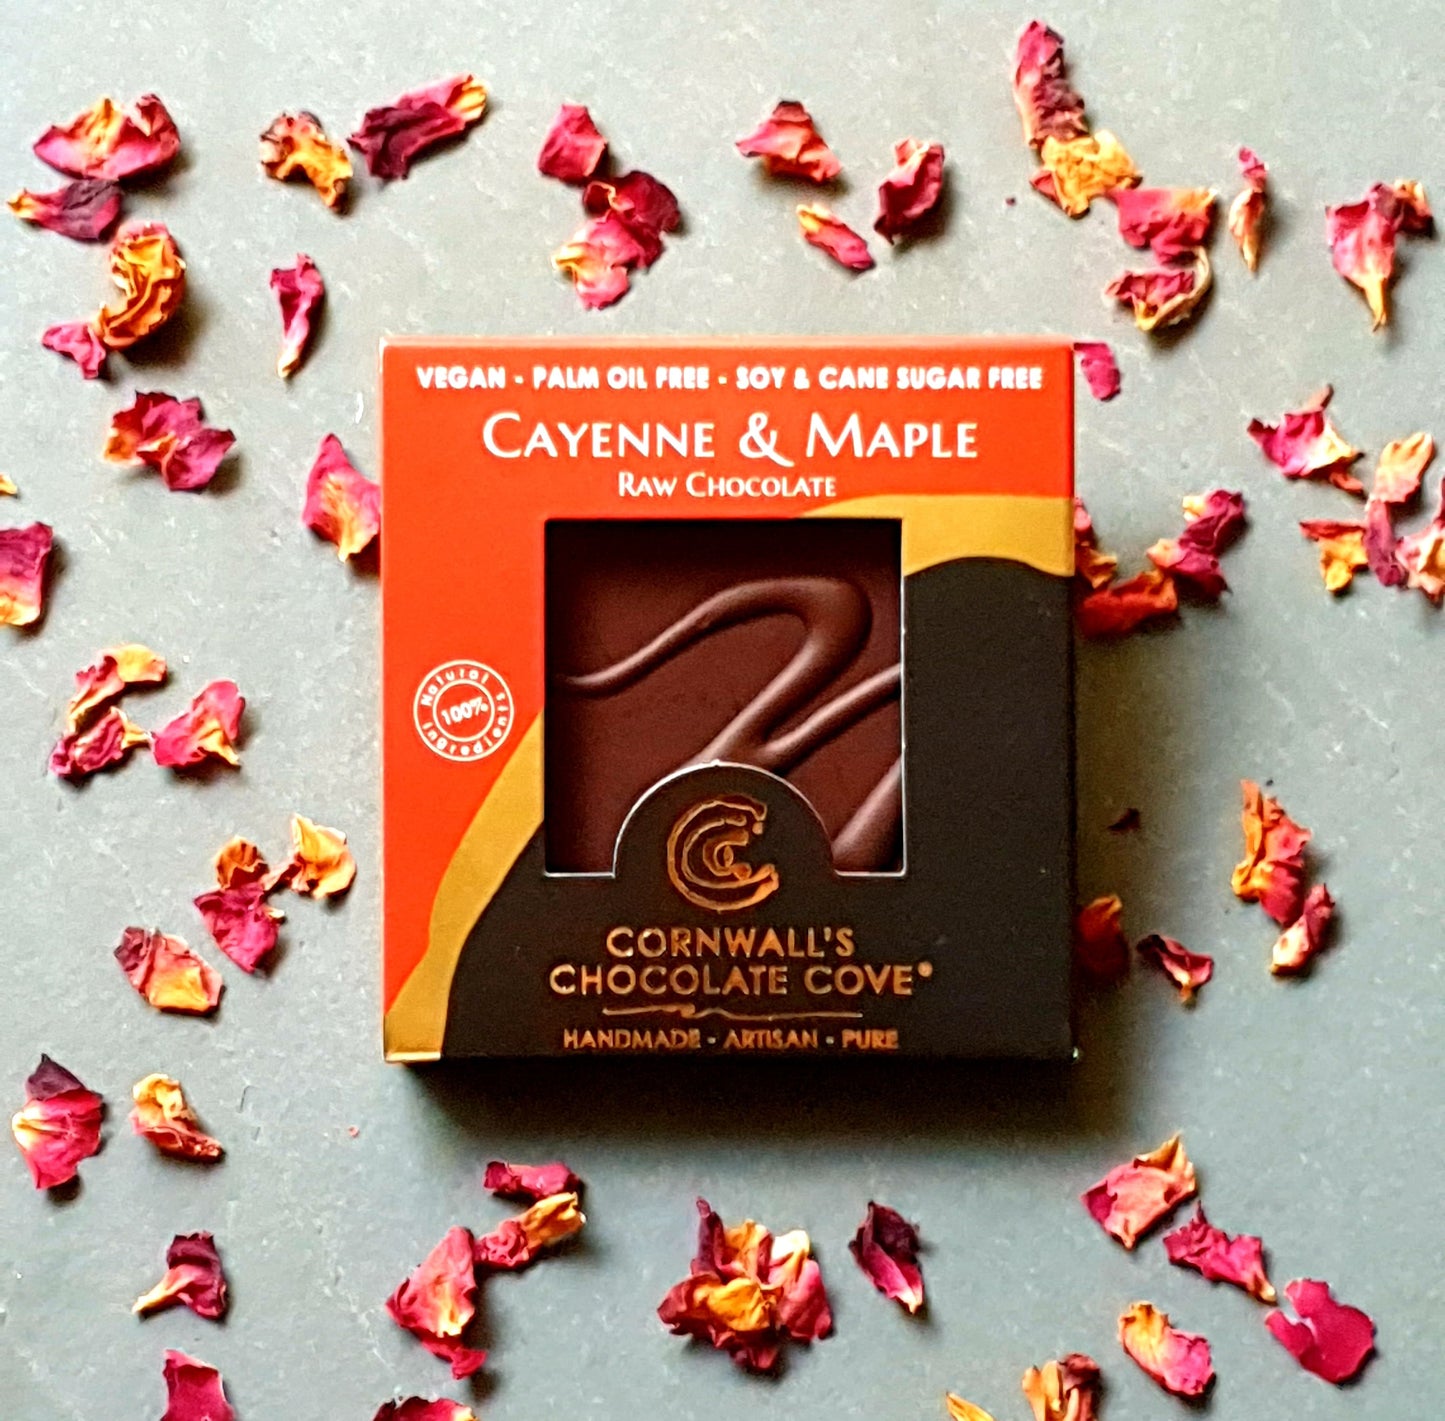 Cornwall's Chocolate Cove plant based, soya, palm oil, cane sugar and gluten free chocolate. Cayenne & Maple